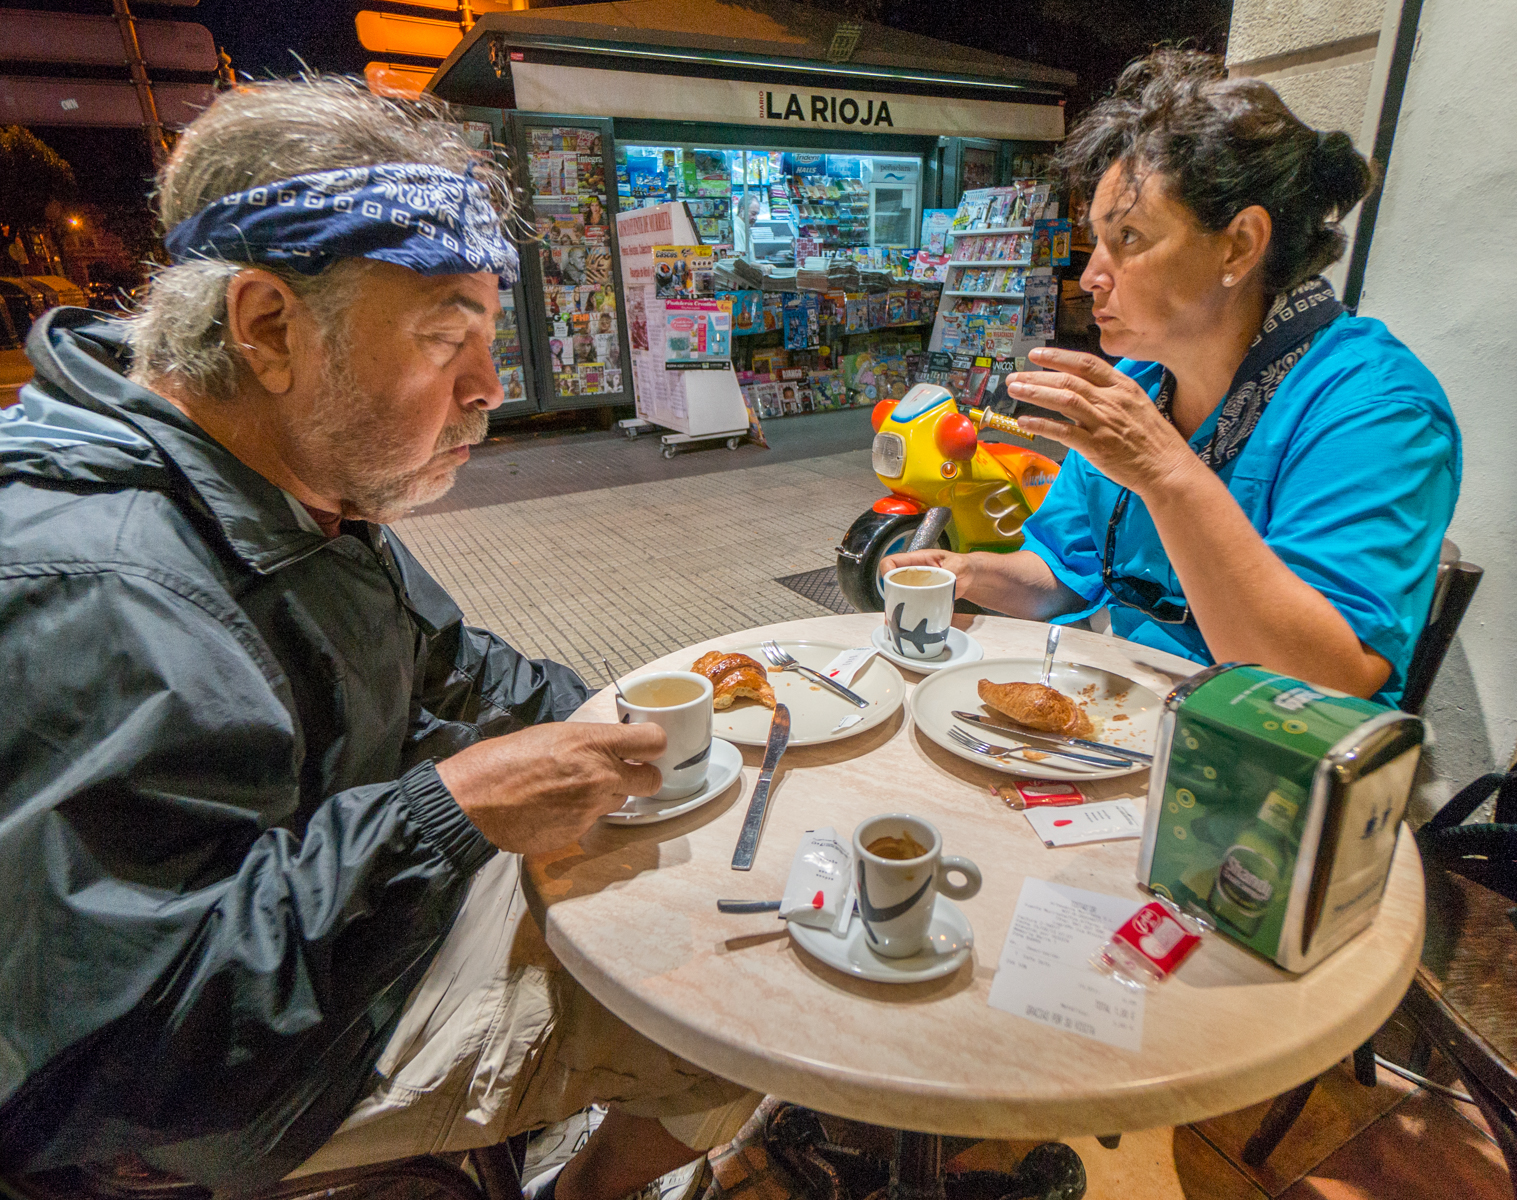 Camino pilgrims stop for early morning coffee and pastry at a café in Logroño, Spain | Photo by Mike Hudak